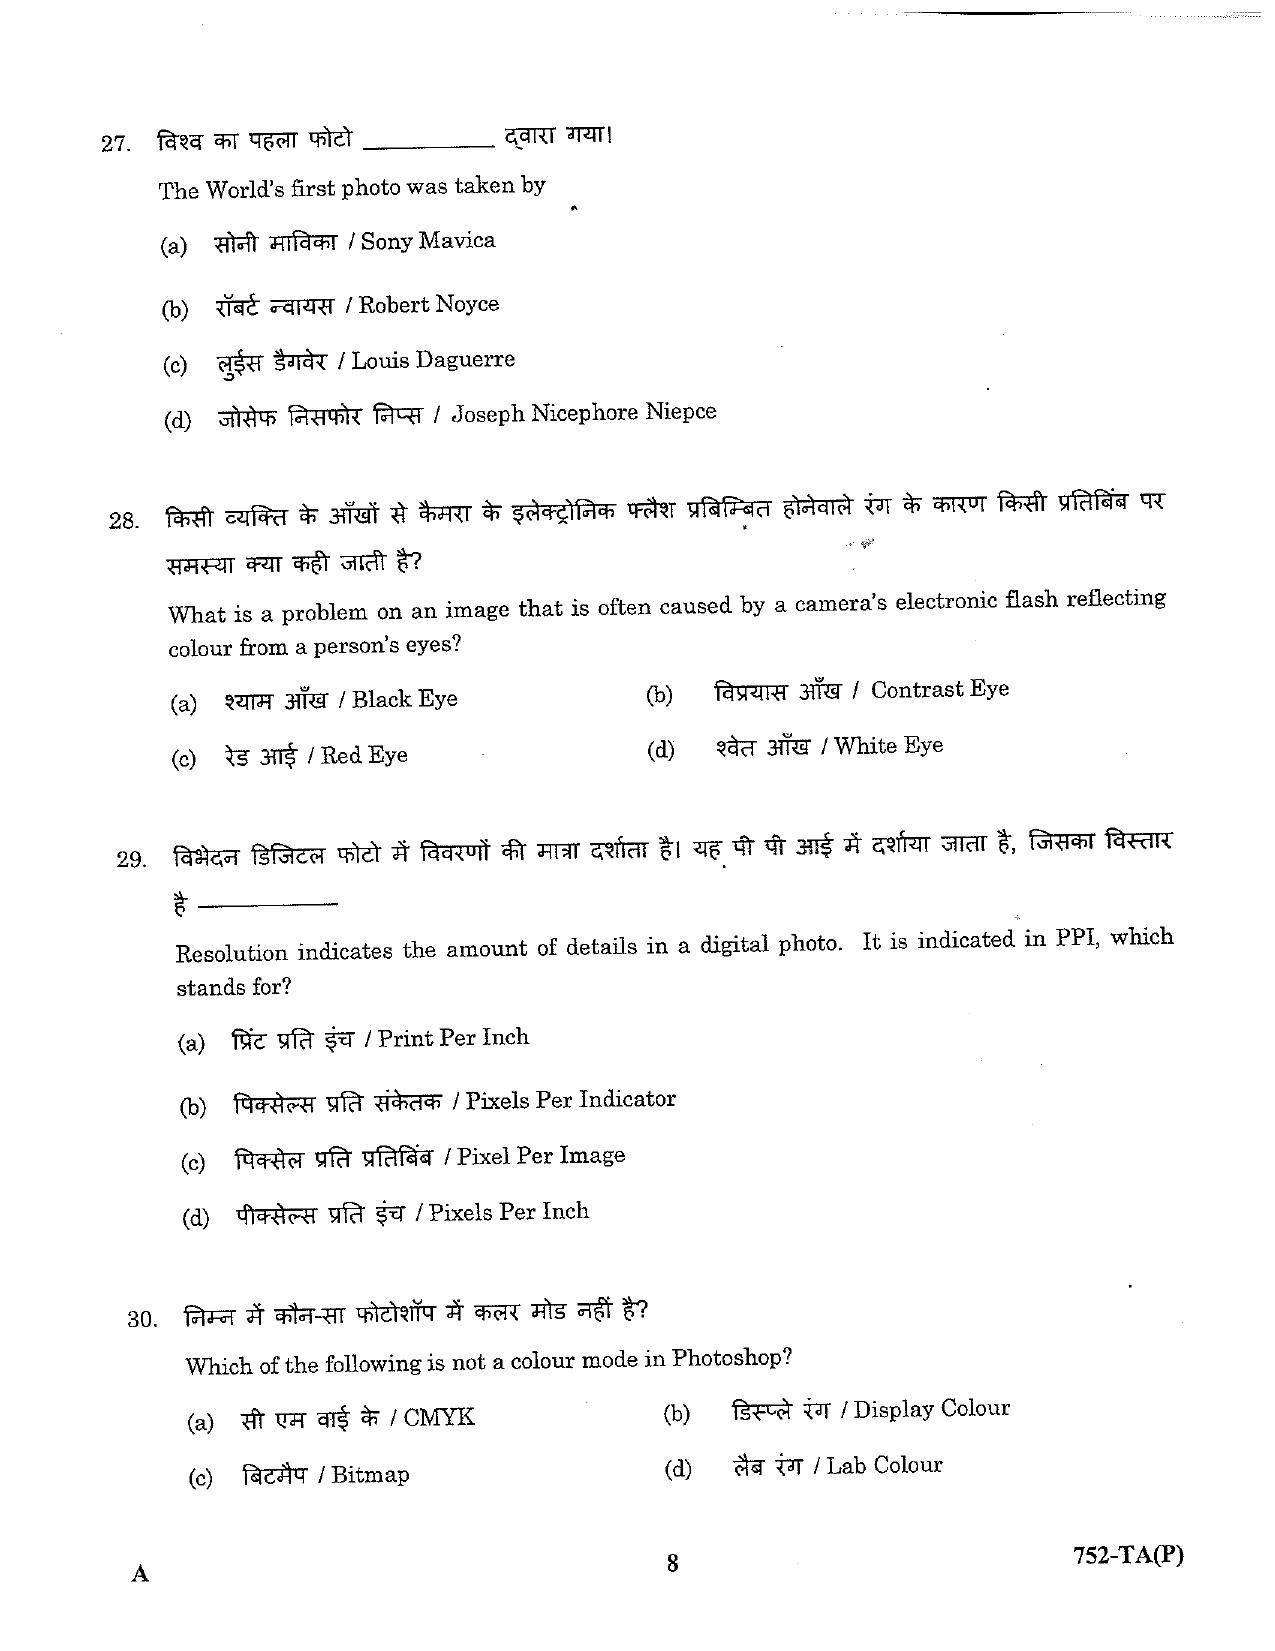 LPSC Technical Assistant (Photography) 2023 Question Paper - Page 8